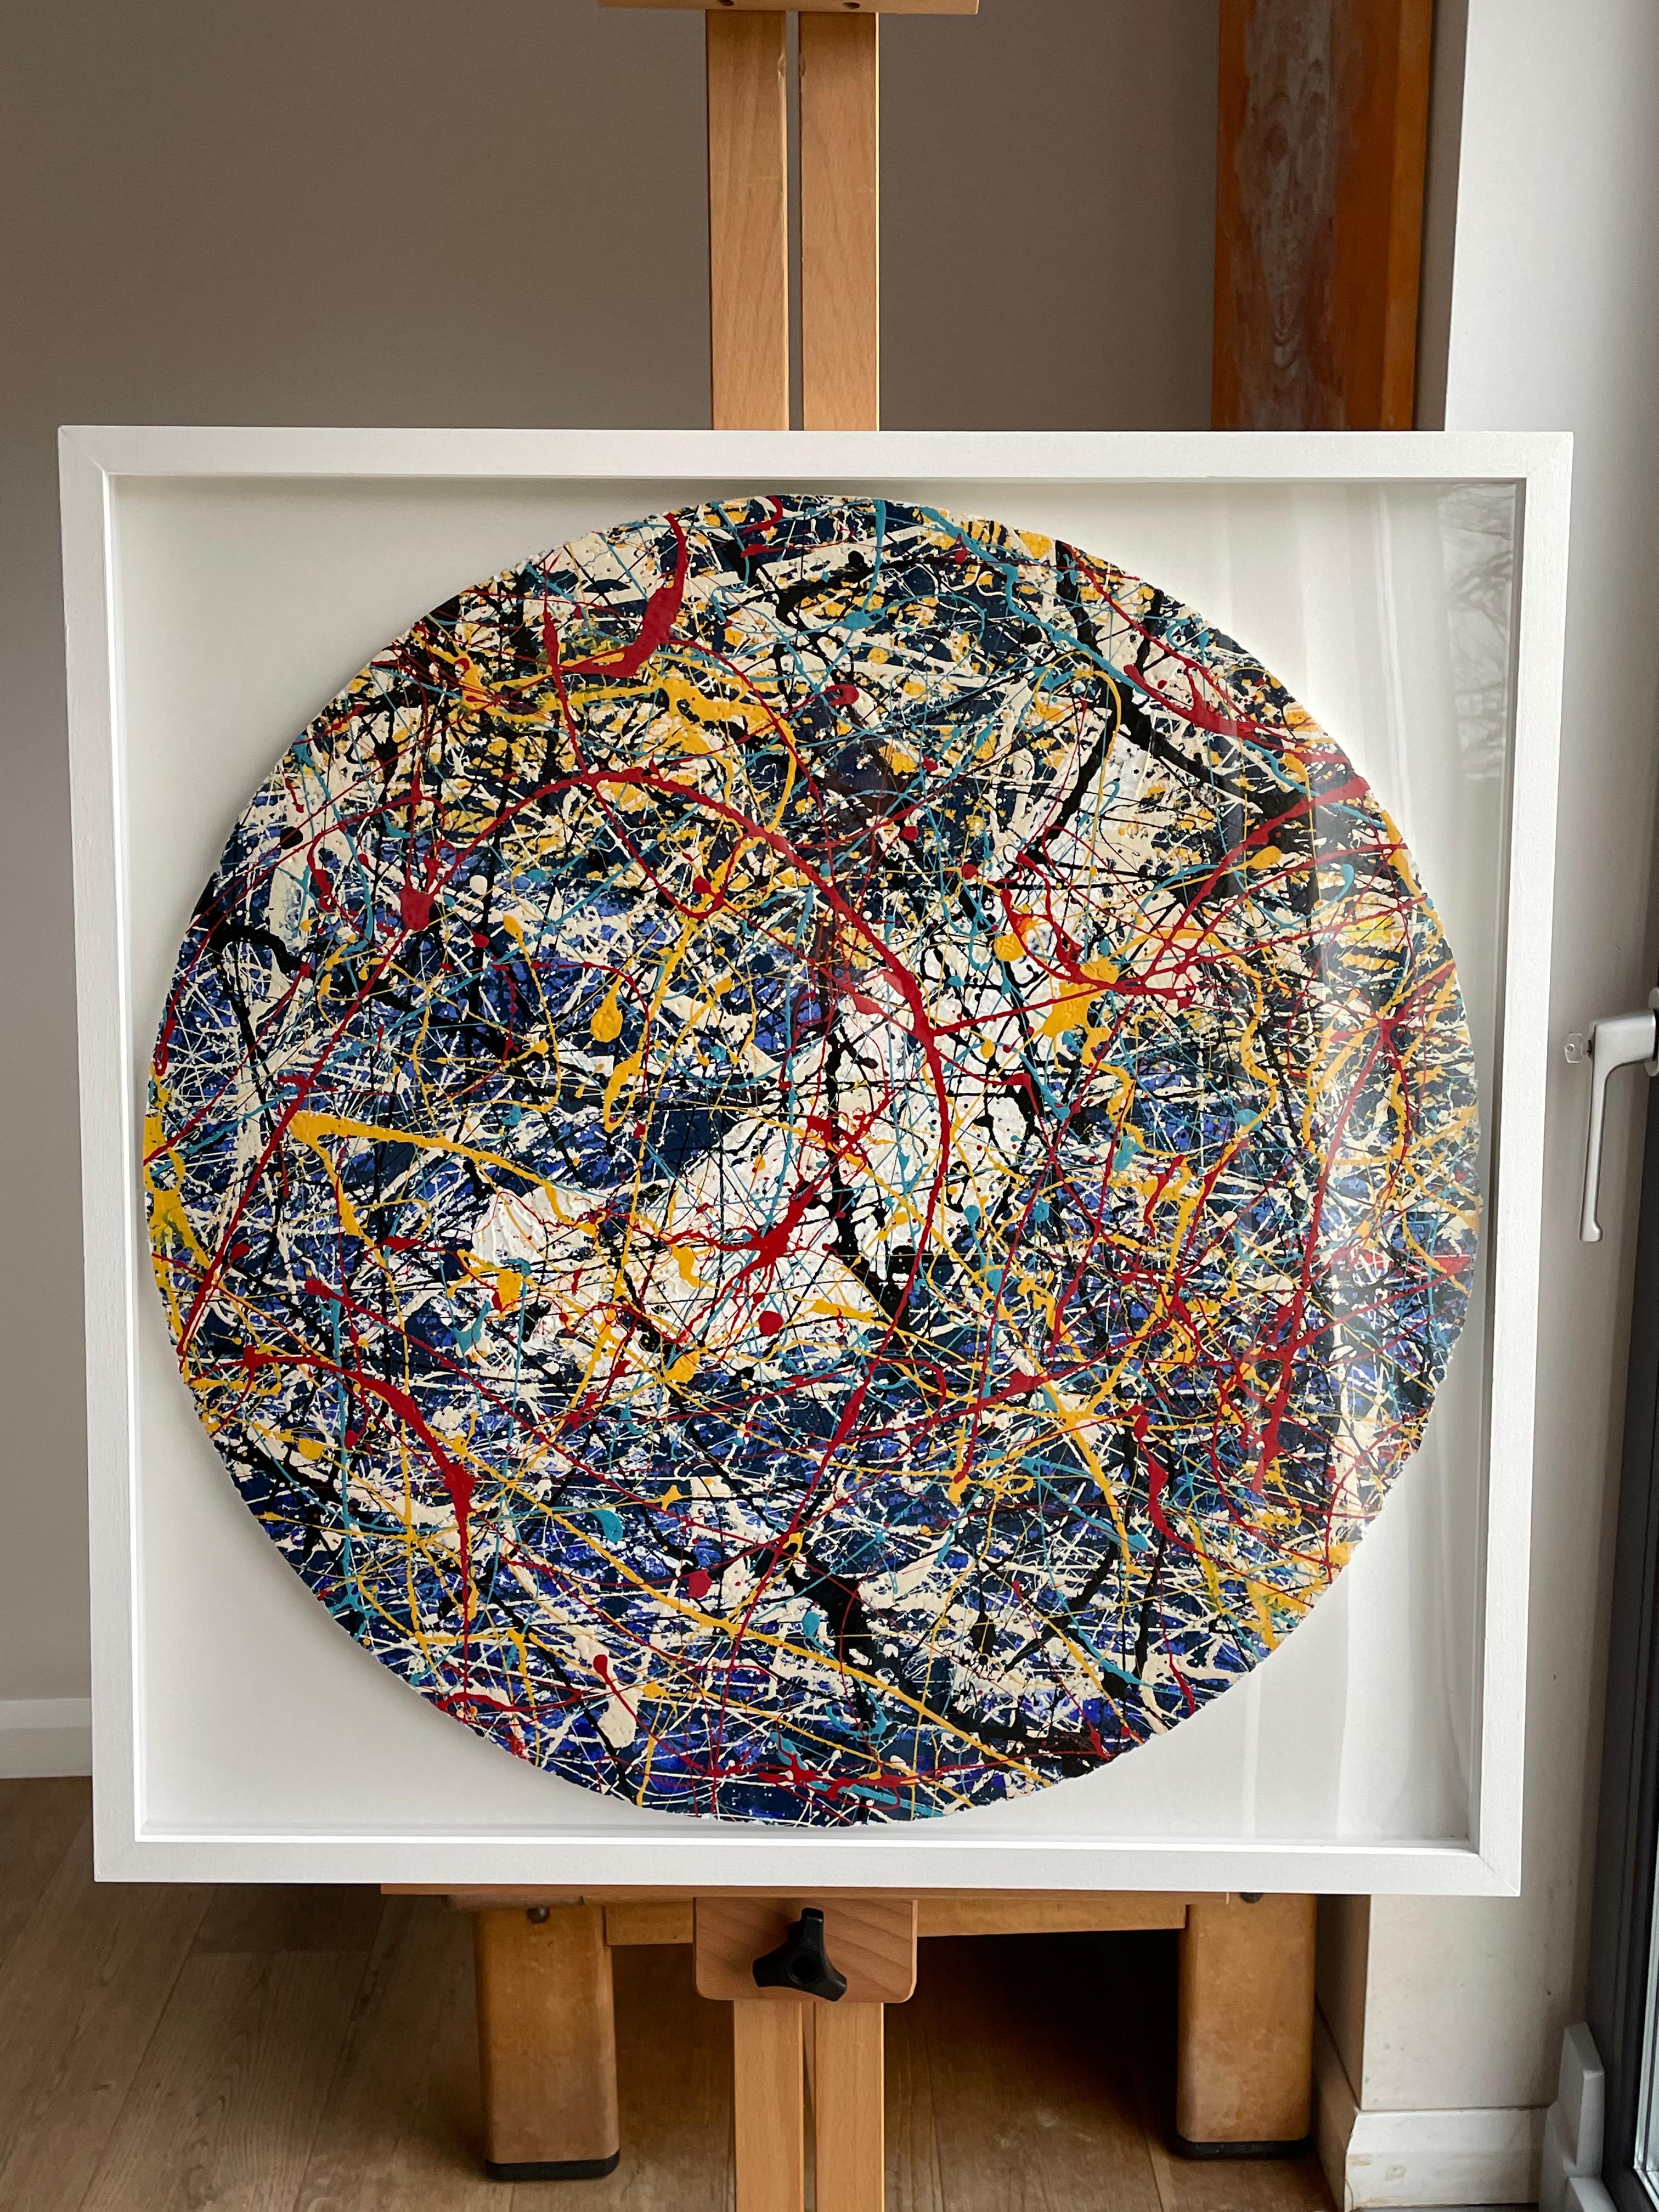 Acrylic paint on polystyrene. An unusual choice of material that gives the piece depth. Vibrant colours swirl through the painting and draw the eye into the intricate patterns that characterise this work.

Signed and dated verso.

In a contemporary